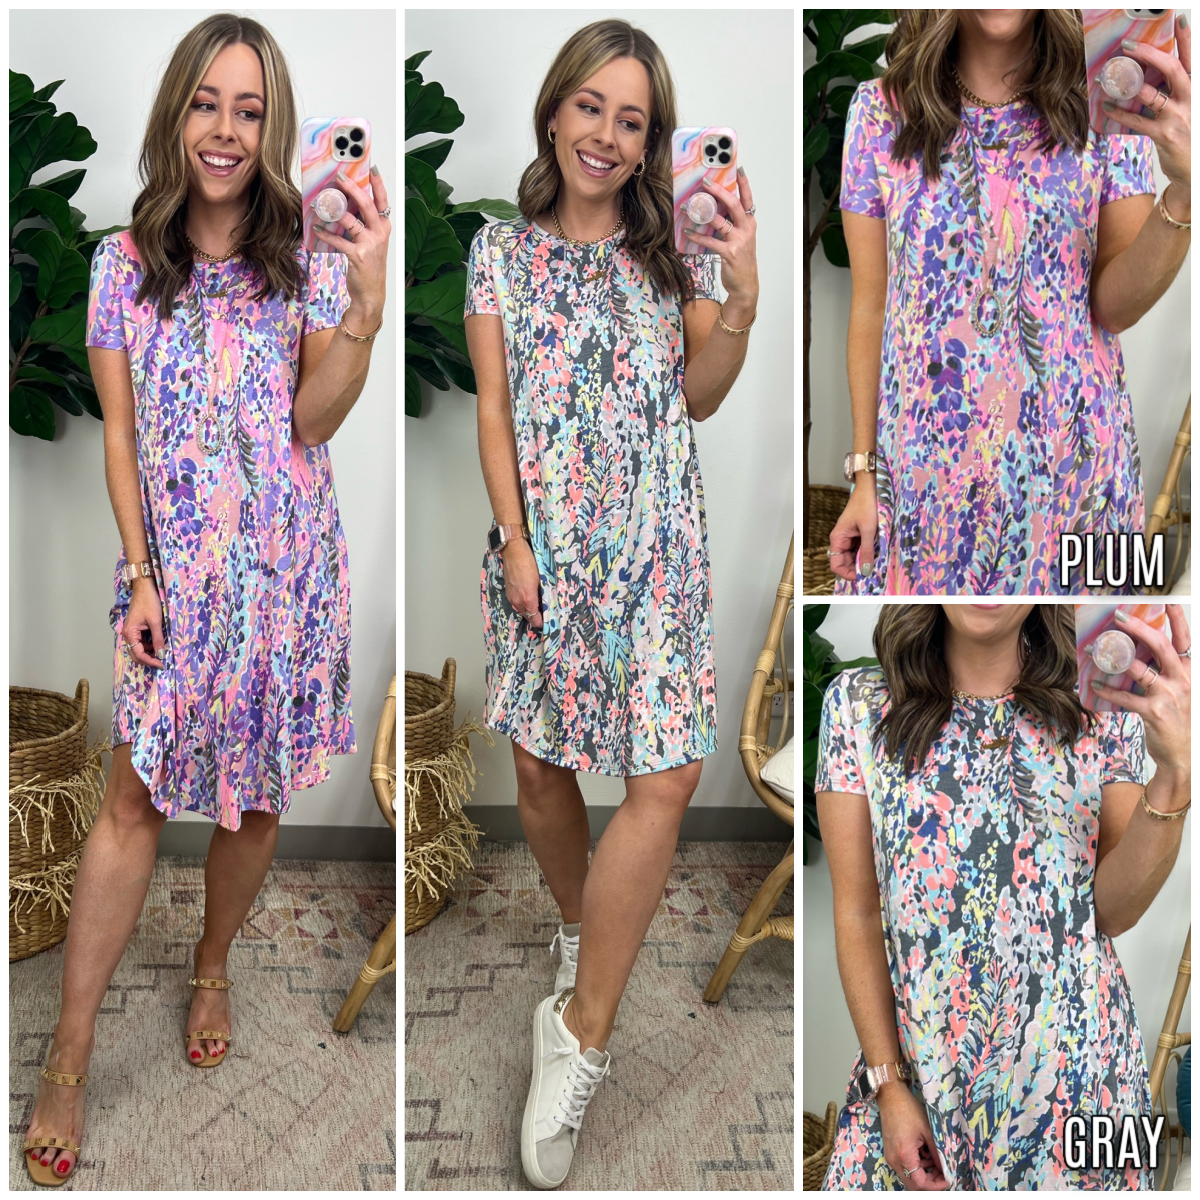  Summer Trip Floral Palm Print Dress - FINAL SALE - Madison and Mallory